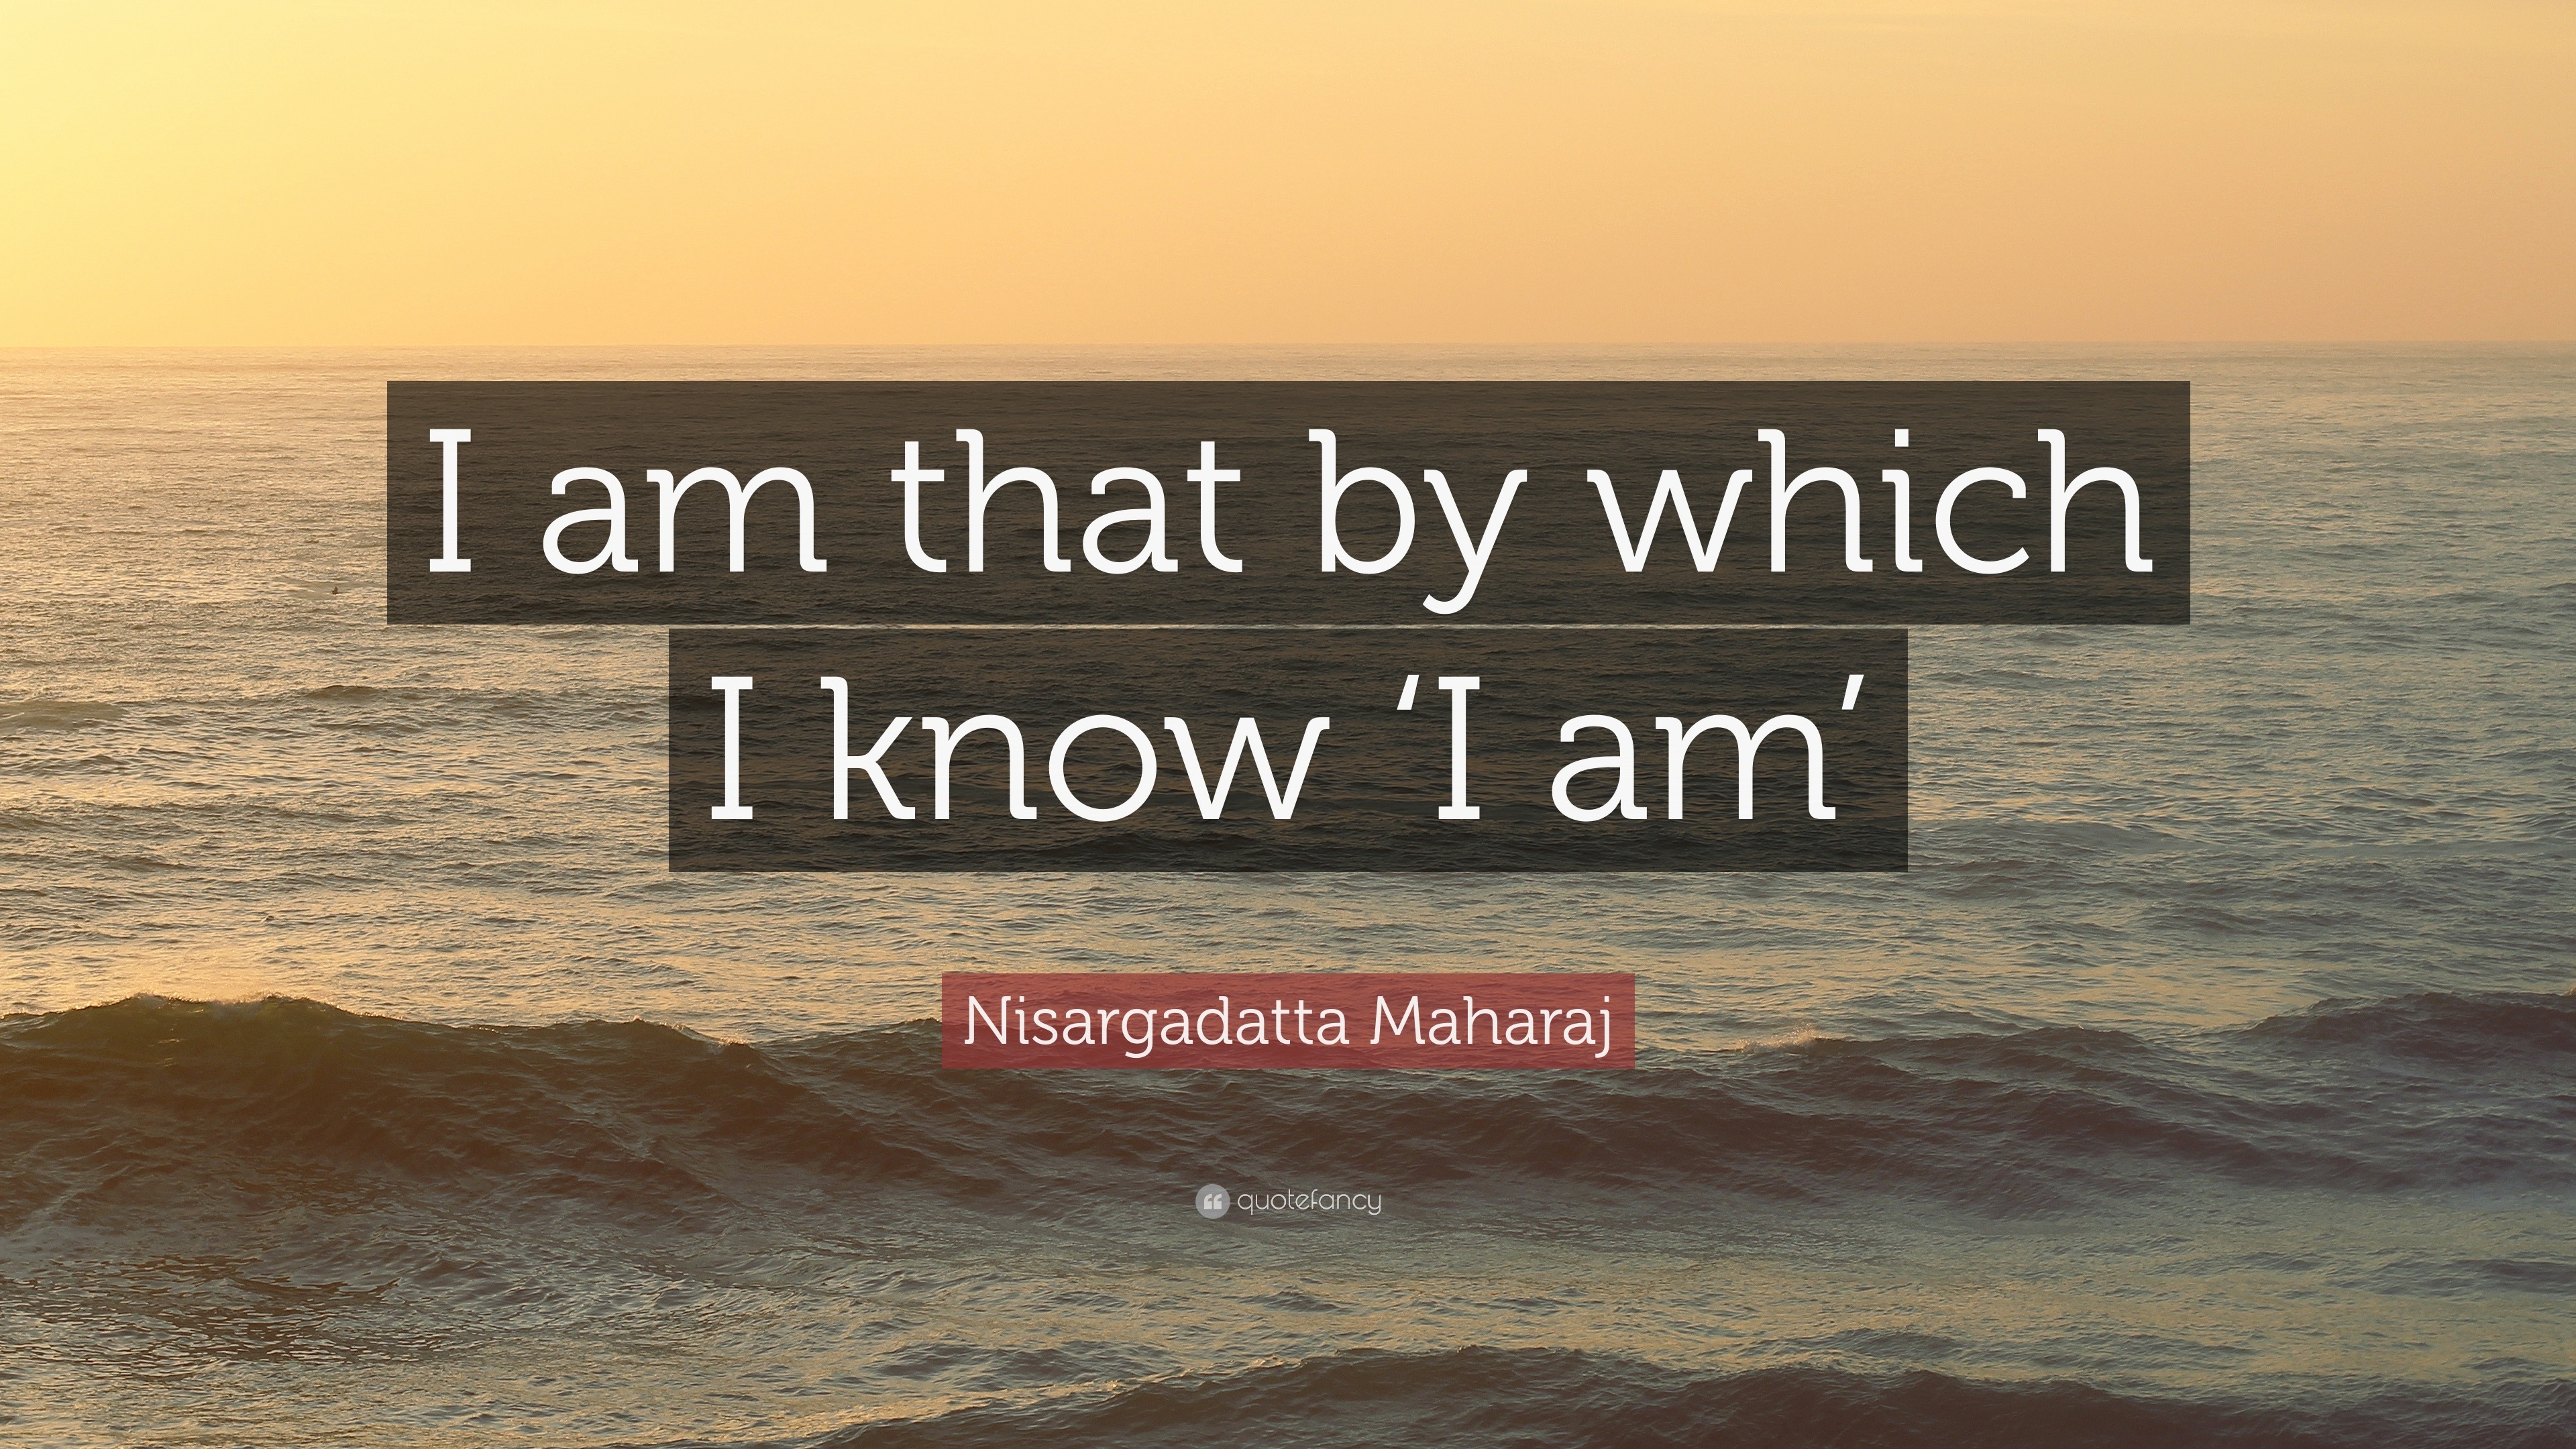 Nisargadatta Maharaj Quote: “I am that by which I know ‘I am’”